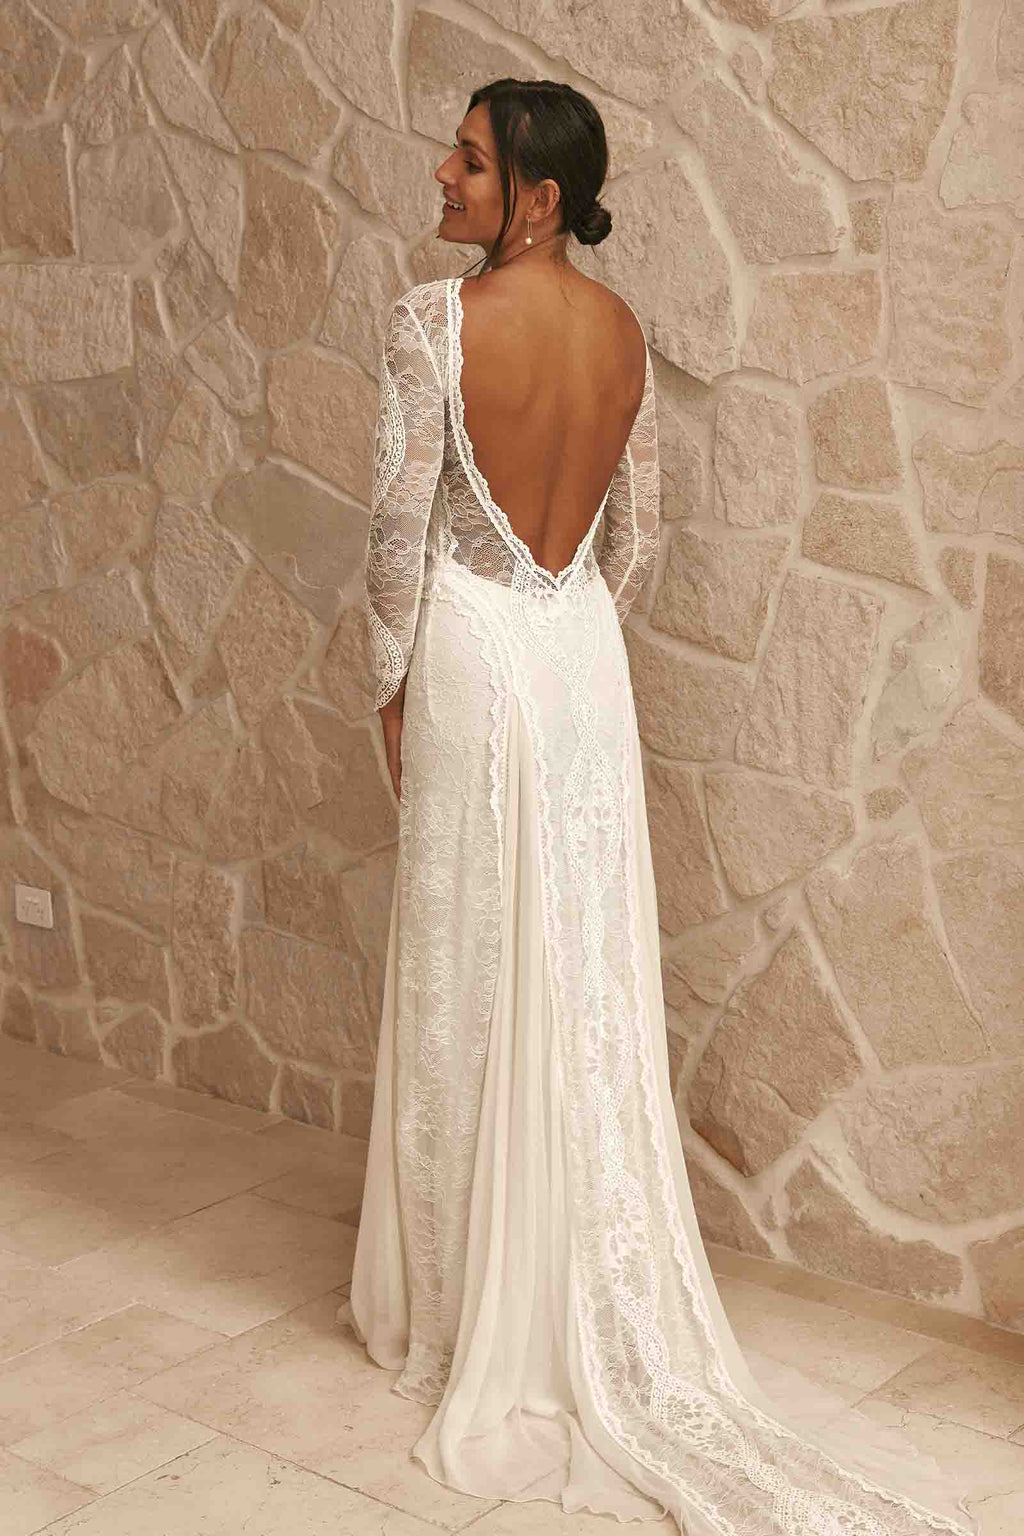 Lightweight Ball Gown Wedding Dresses for Your Warm Weather Celebration